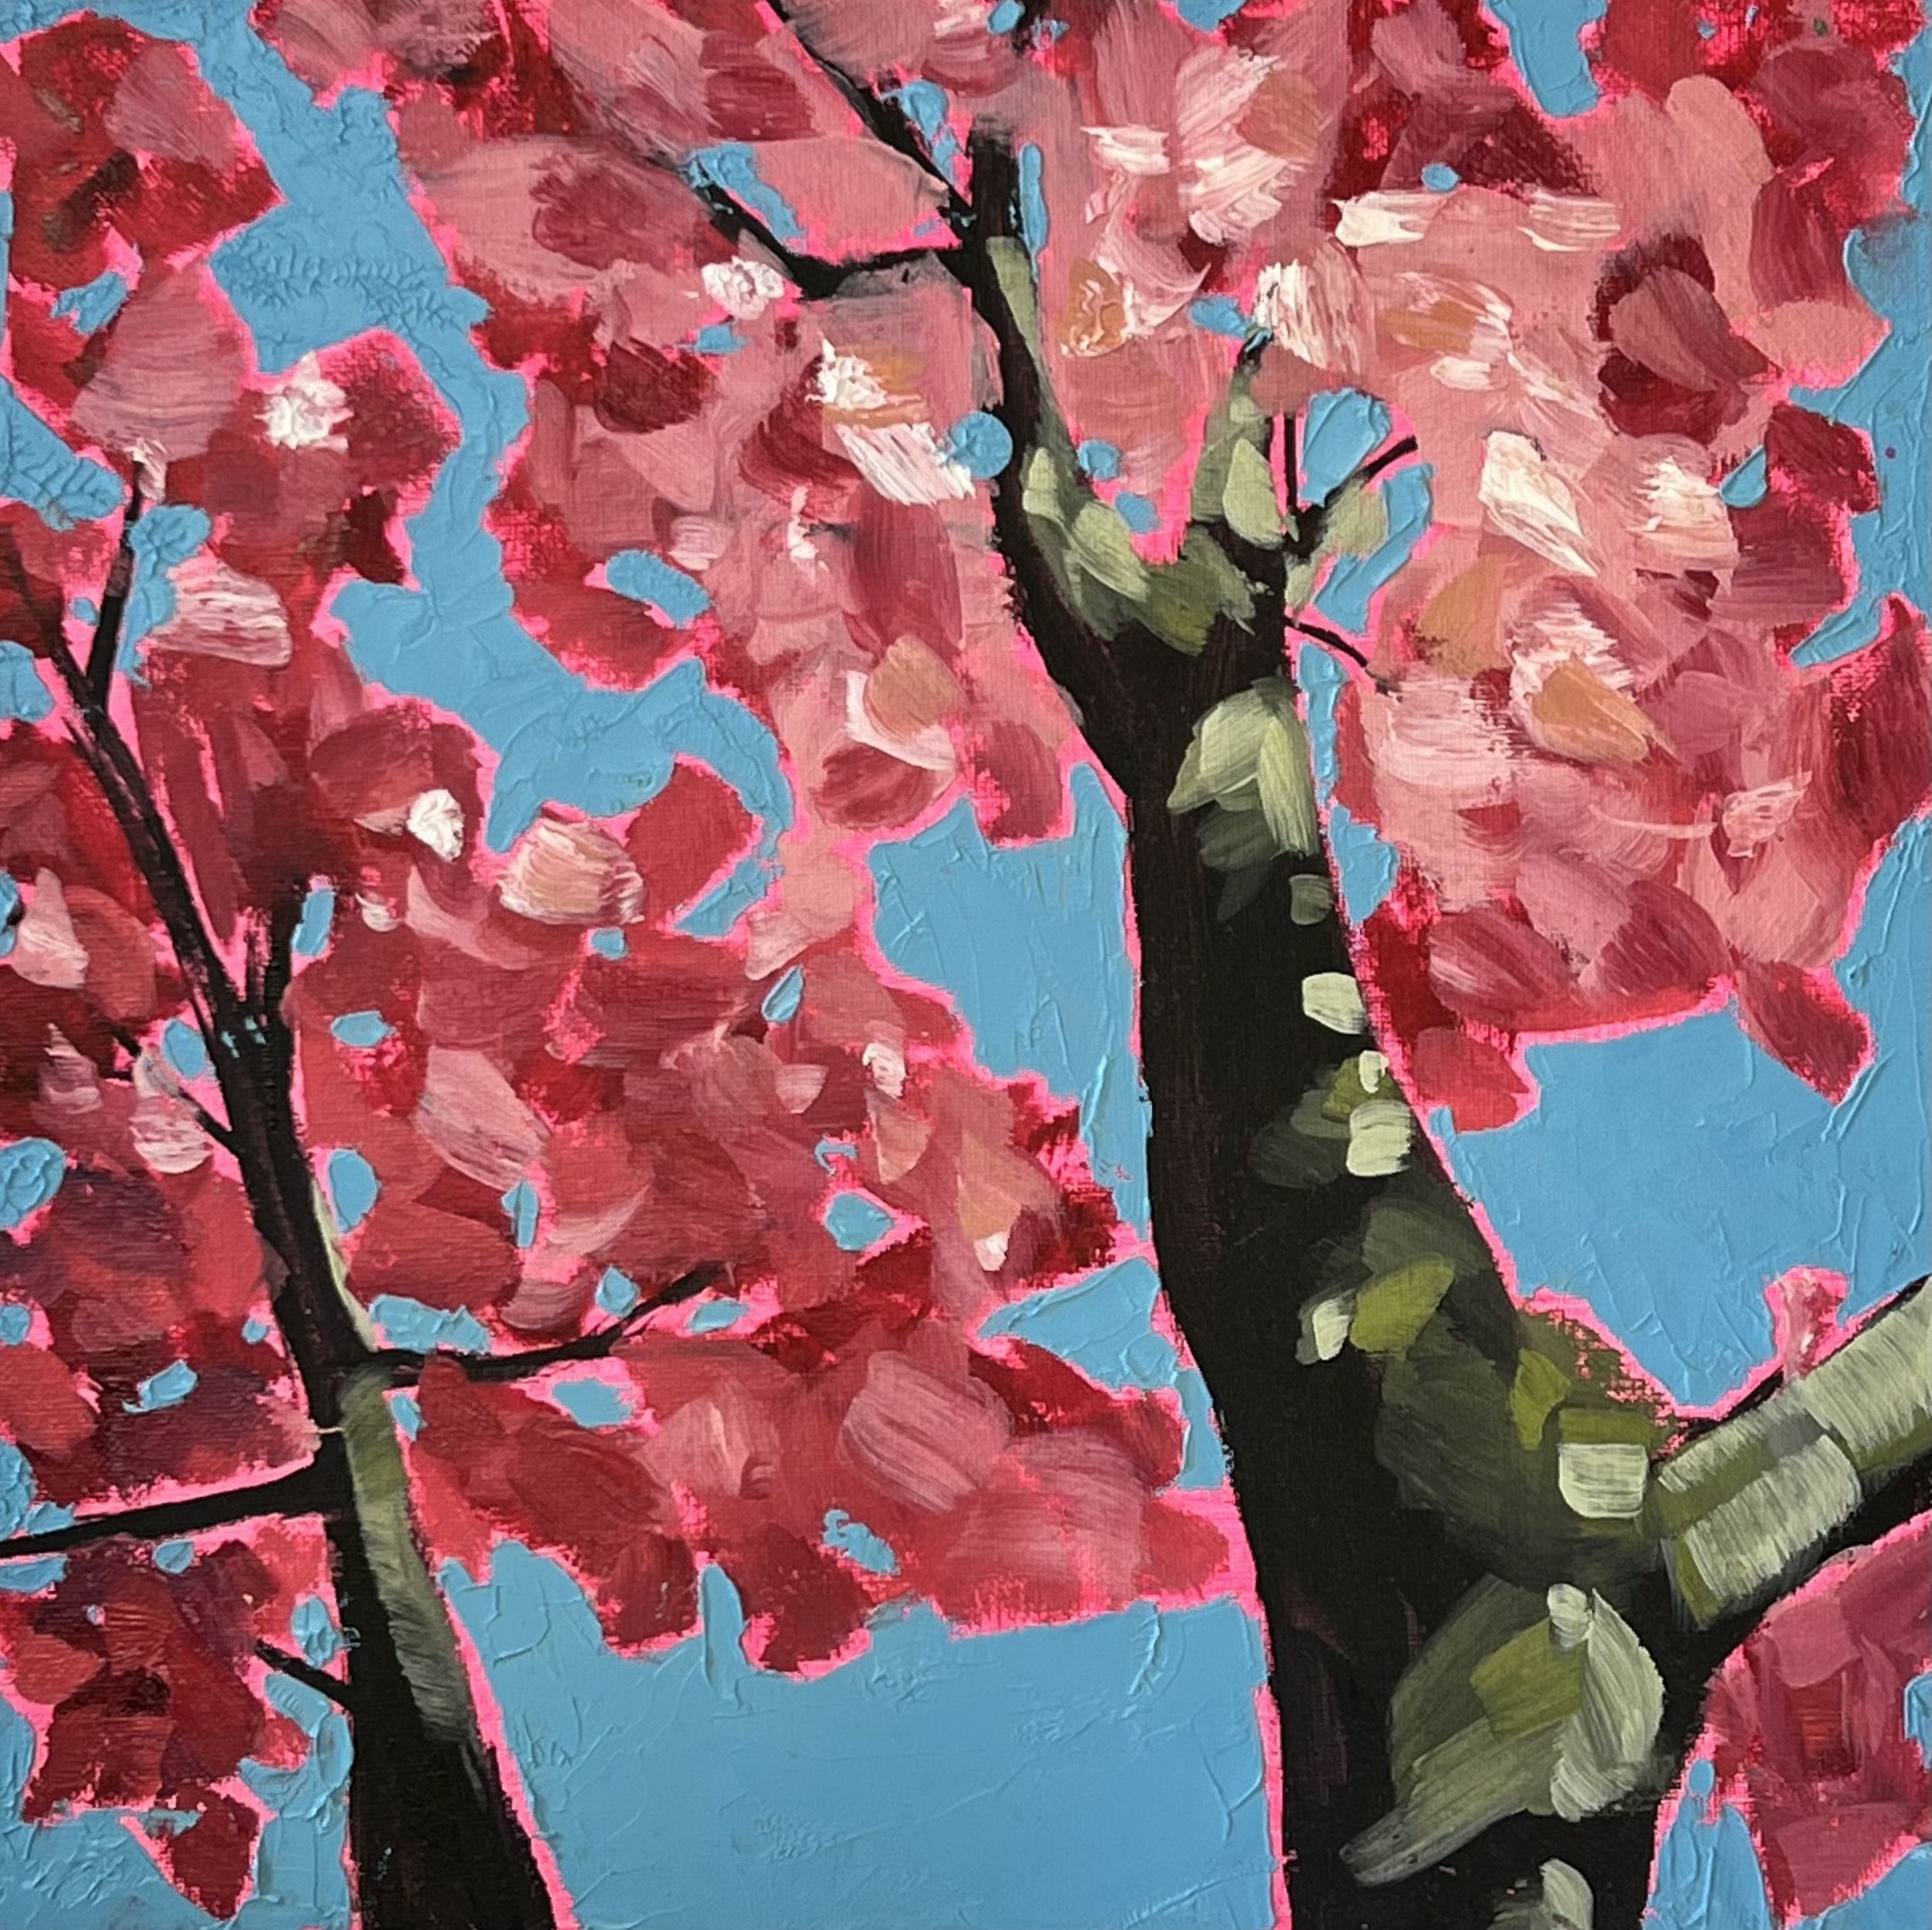 Looking Up Through Pink Blossom Trees to Feel Compassion by Emily Finch